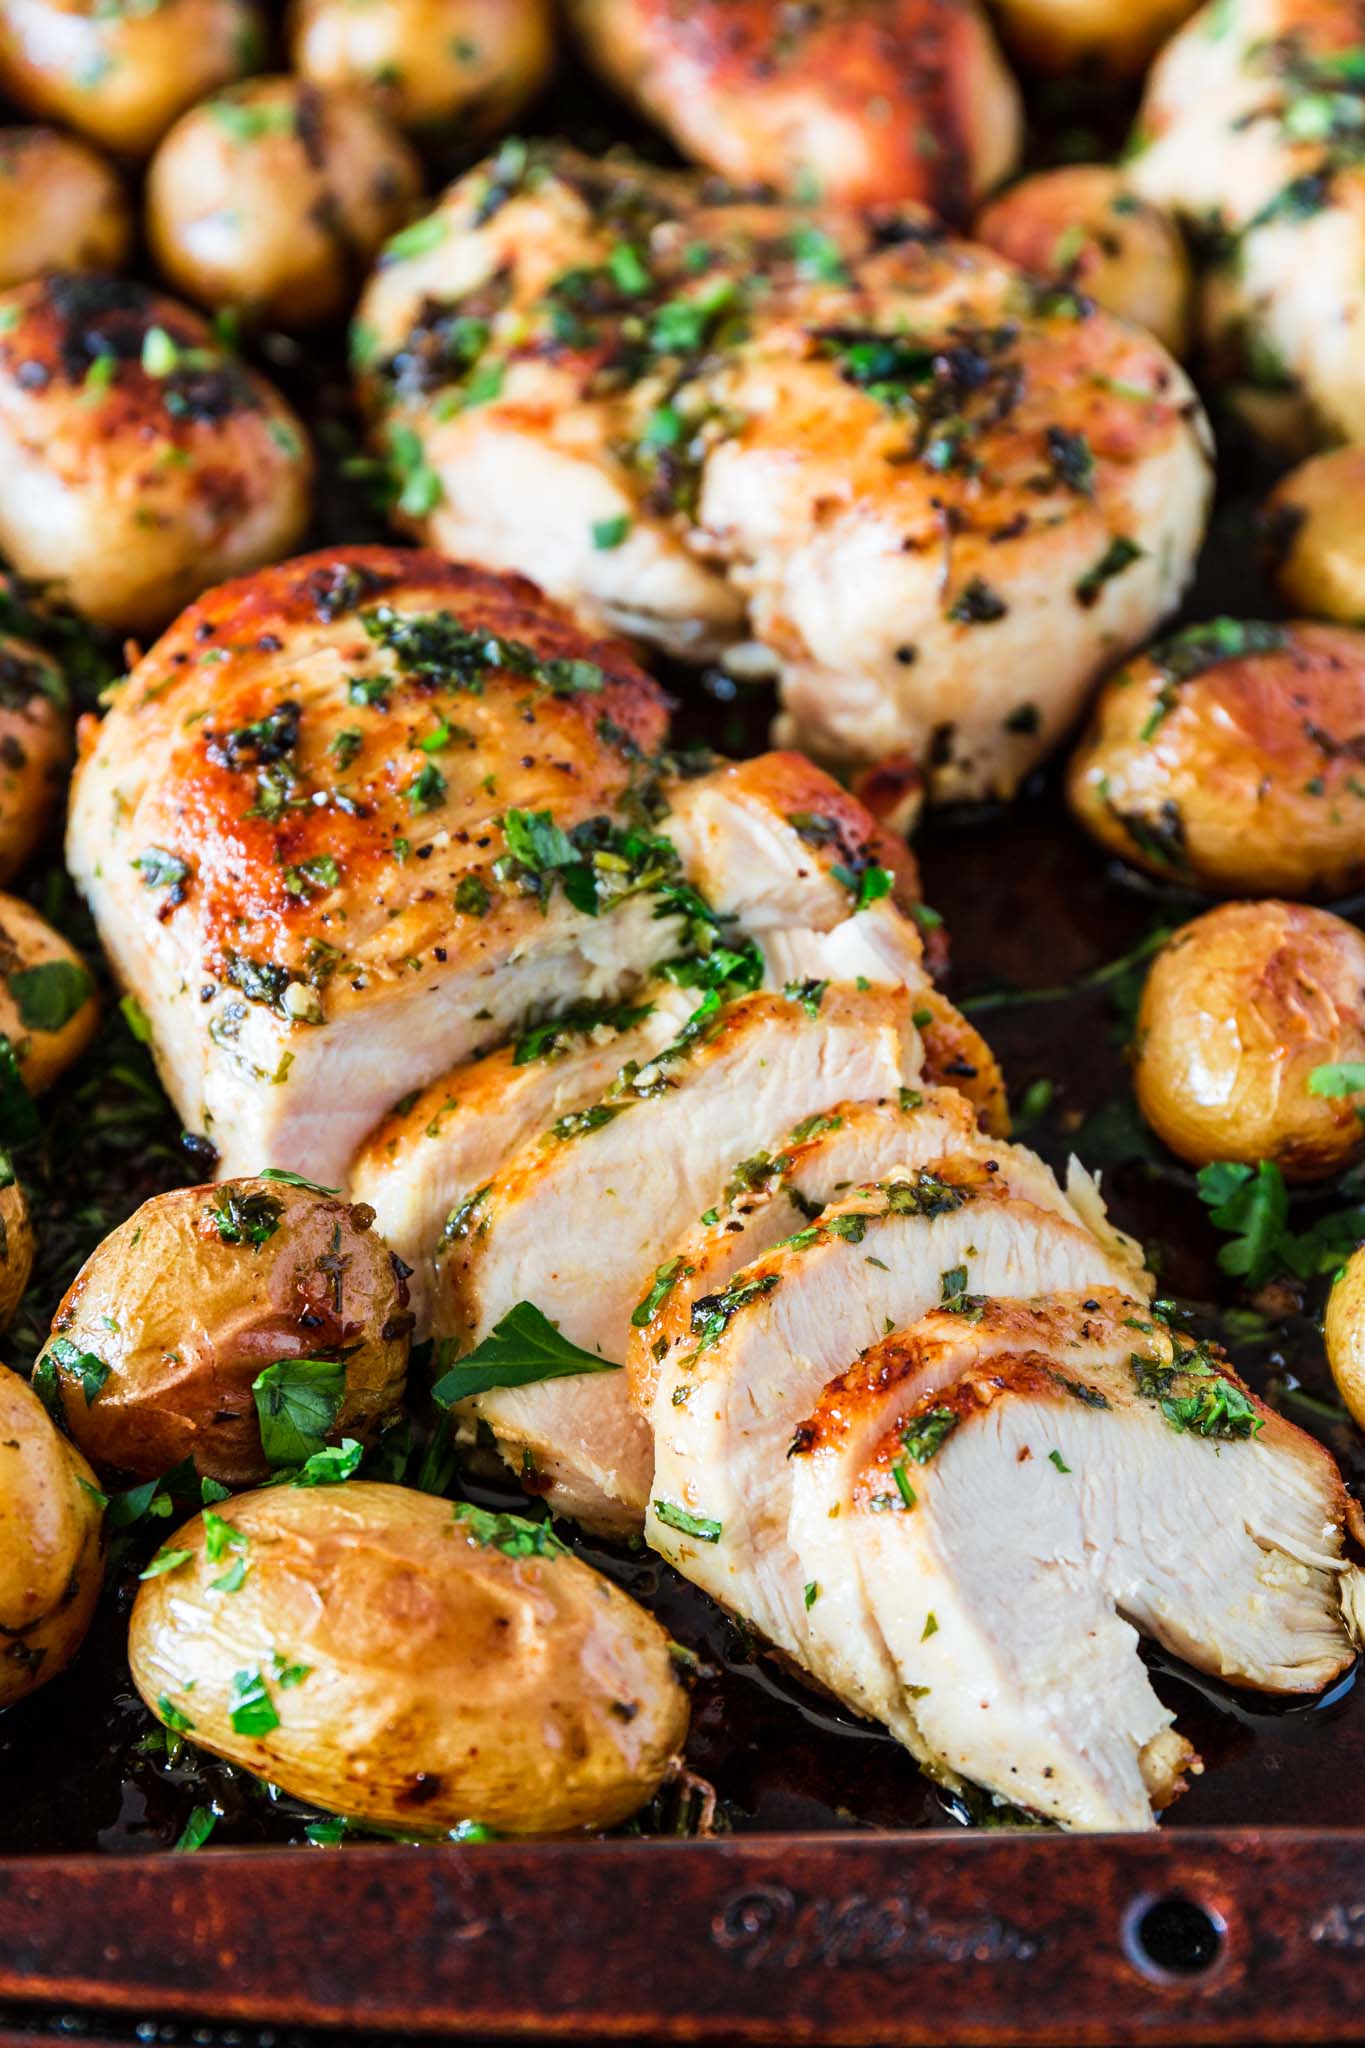 Sheet Pan Chicken with Spicy Potatoes (Batata Harra) | www.oliviascuisine.com | The easiest meal ever consists of juicy and perfectly seasoned chicken breasts served with batata harra, baked Lebanese spicy potatoes that melt in your mouth while enticing your tastebuds. (Recipe by @oliviascuisine.)